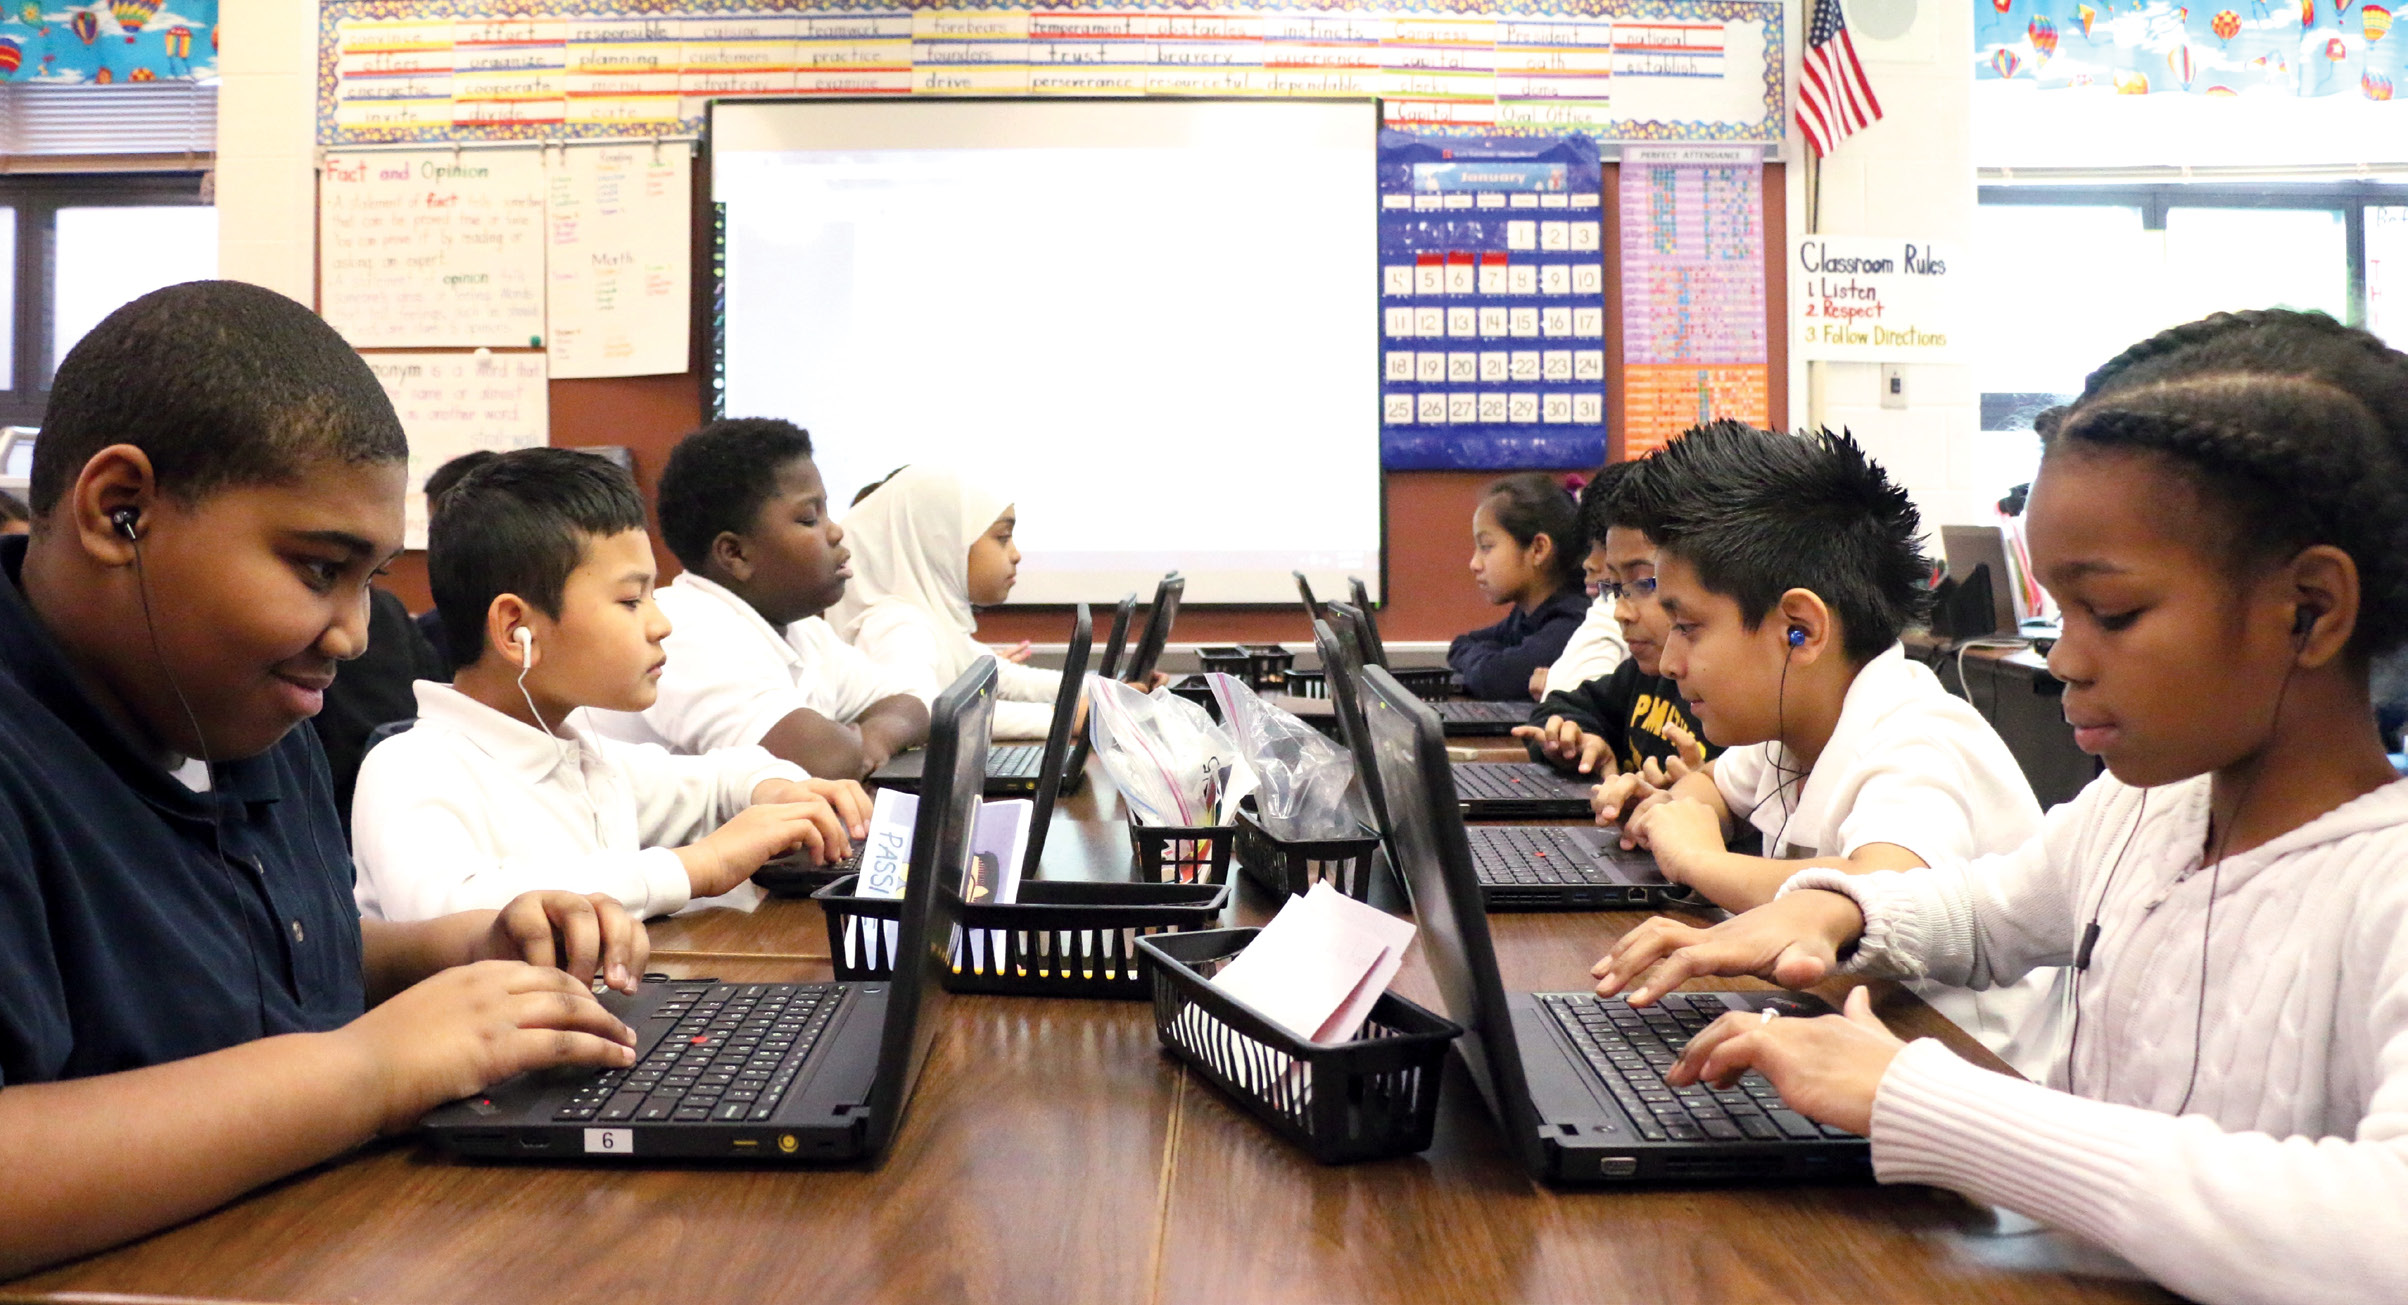 Children sitting across from each other and working on laptop computers in a classroom.